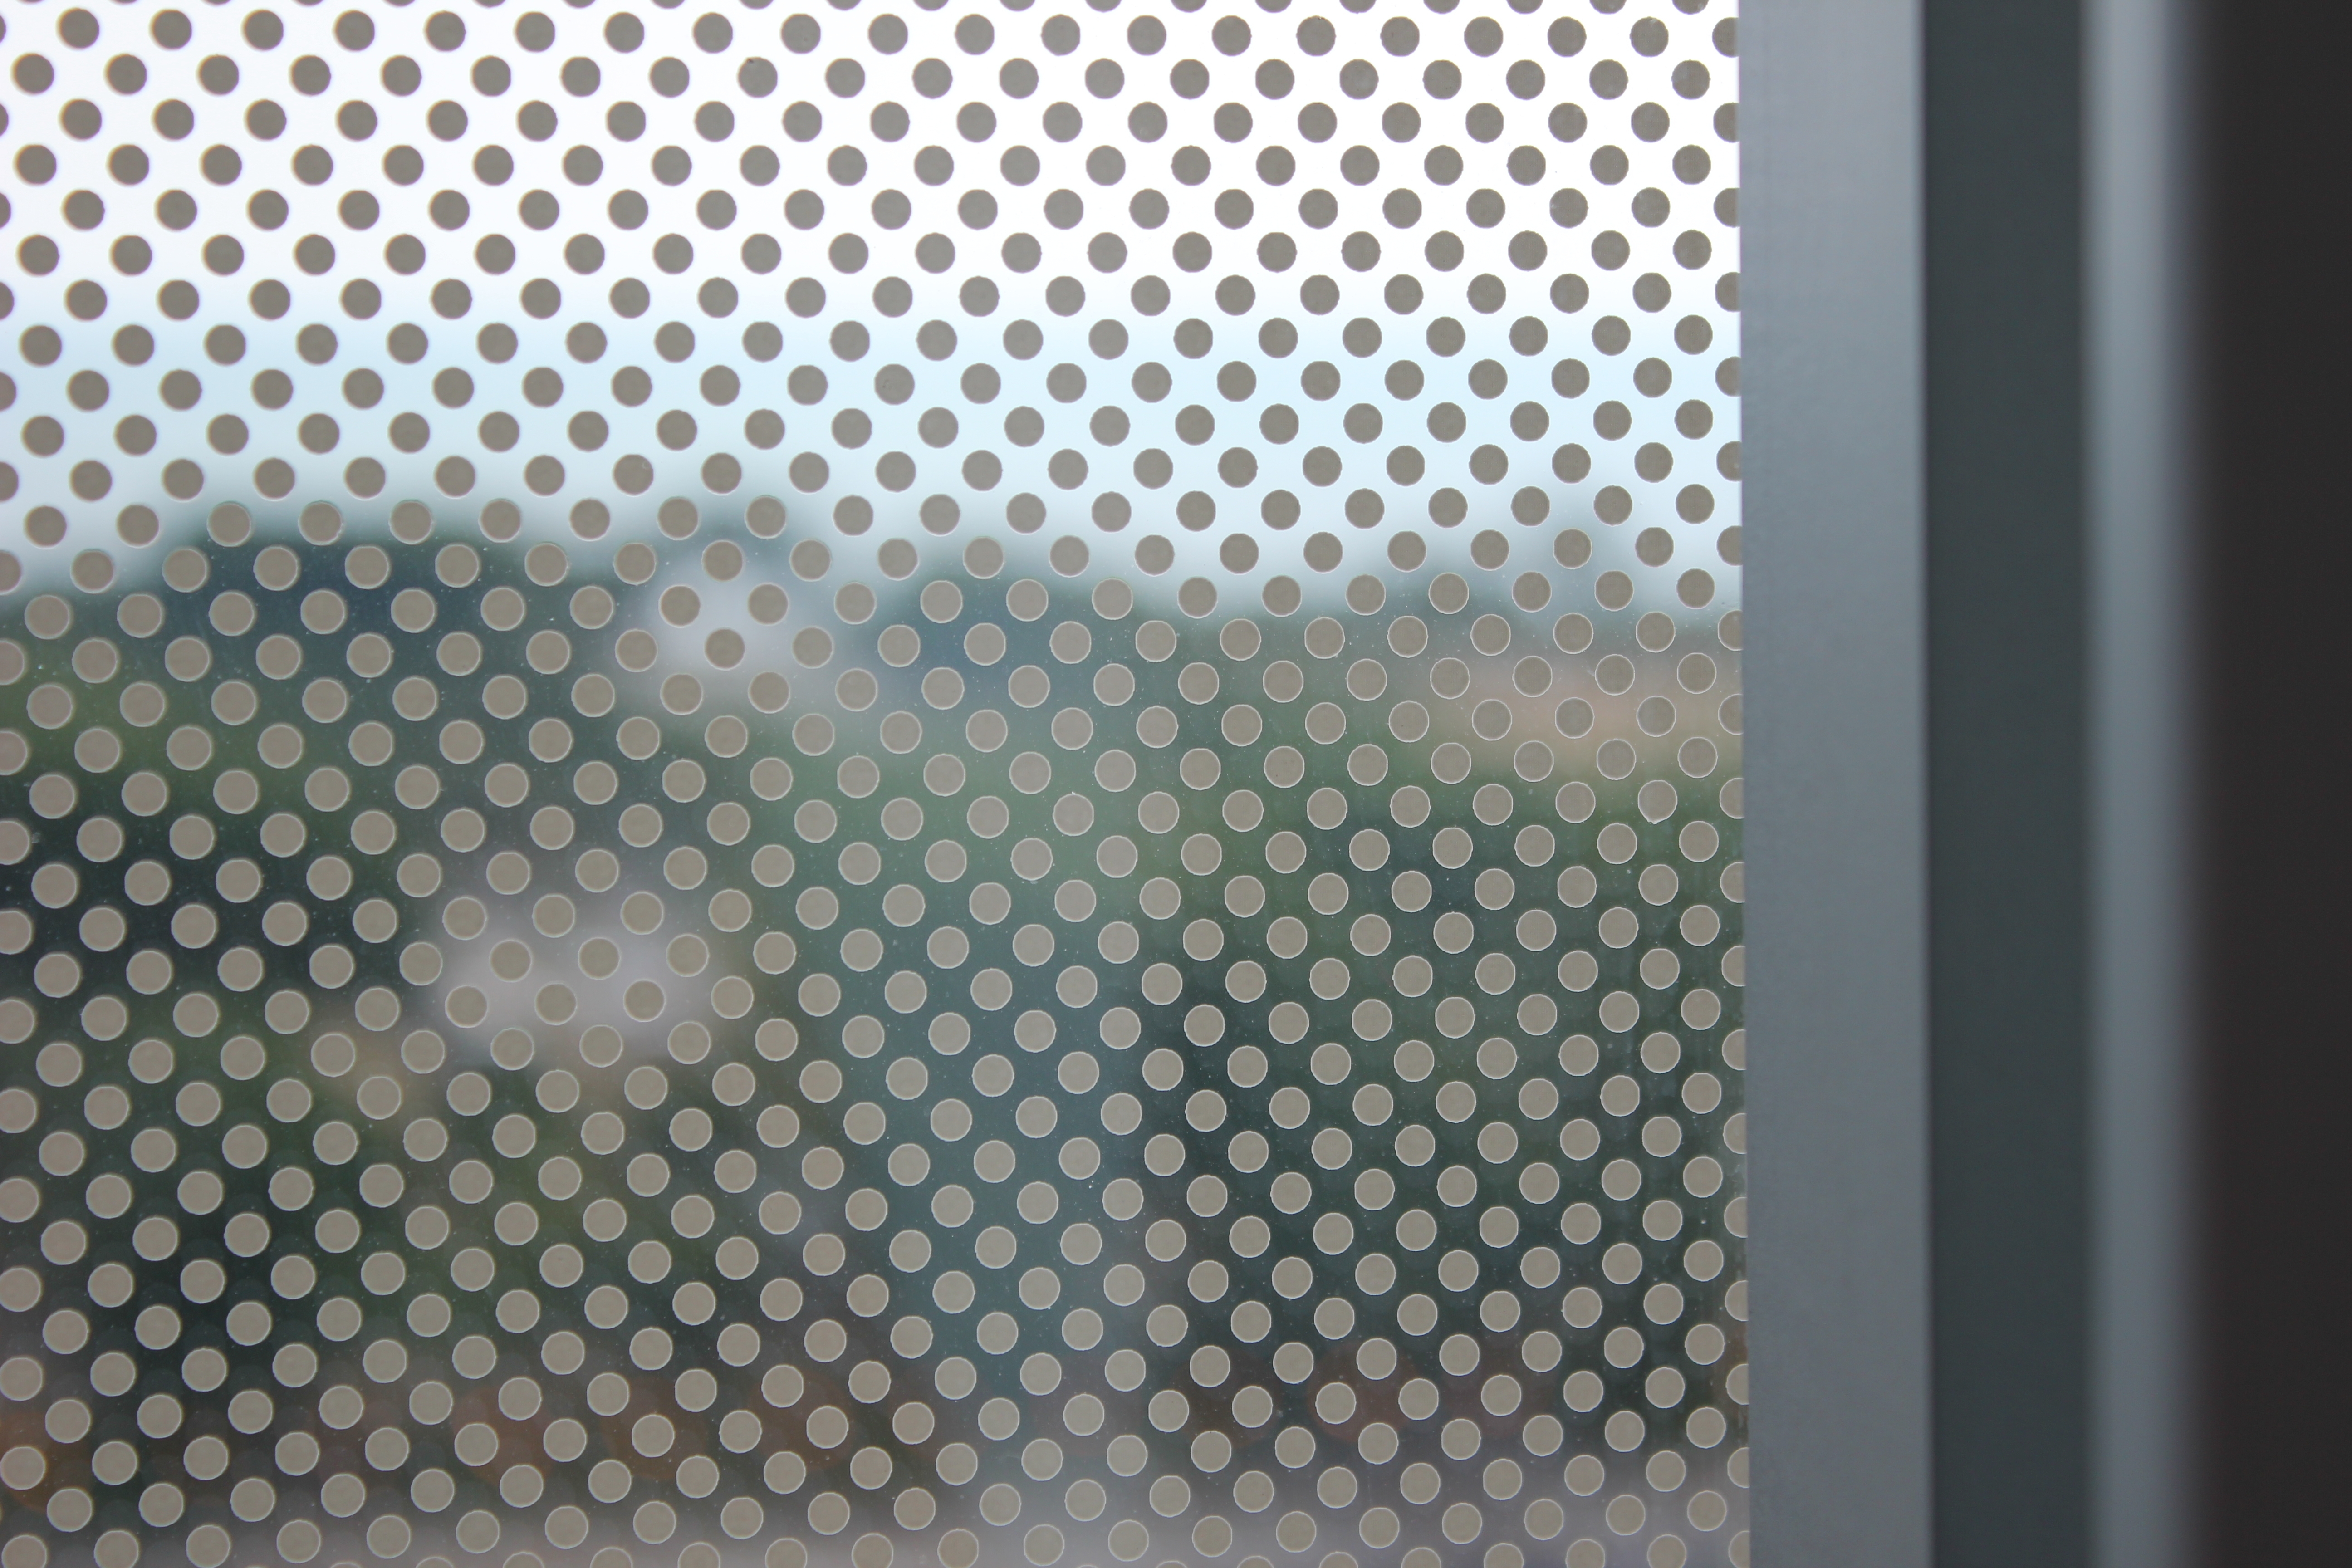 Fritted Glass is pictured with small dots to reduce direct sunlight